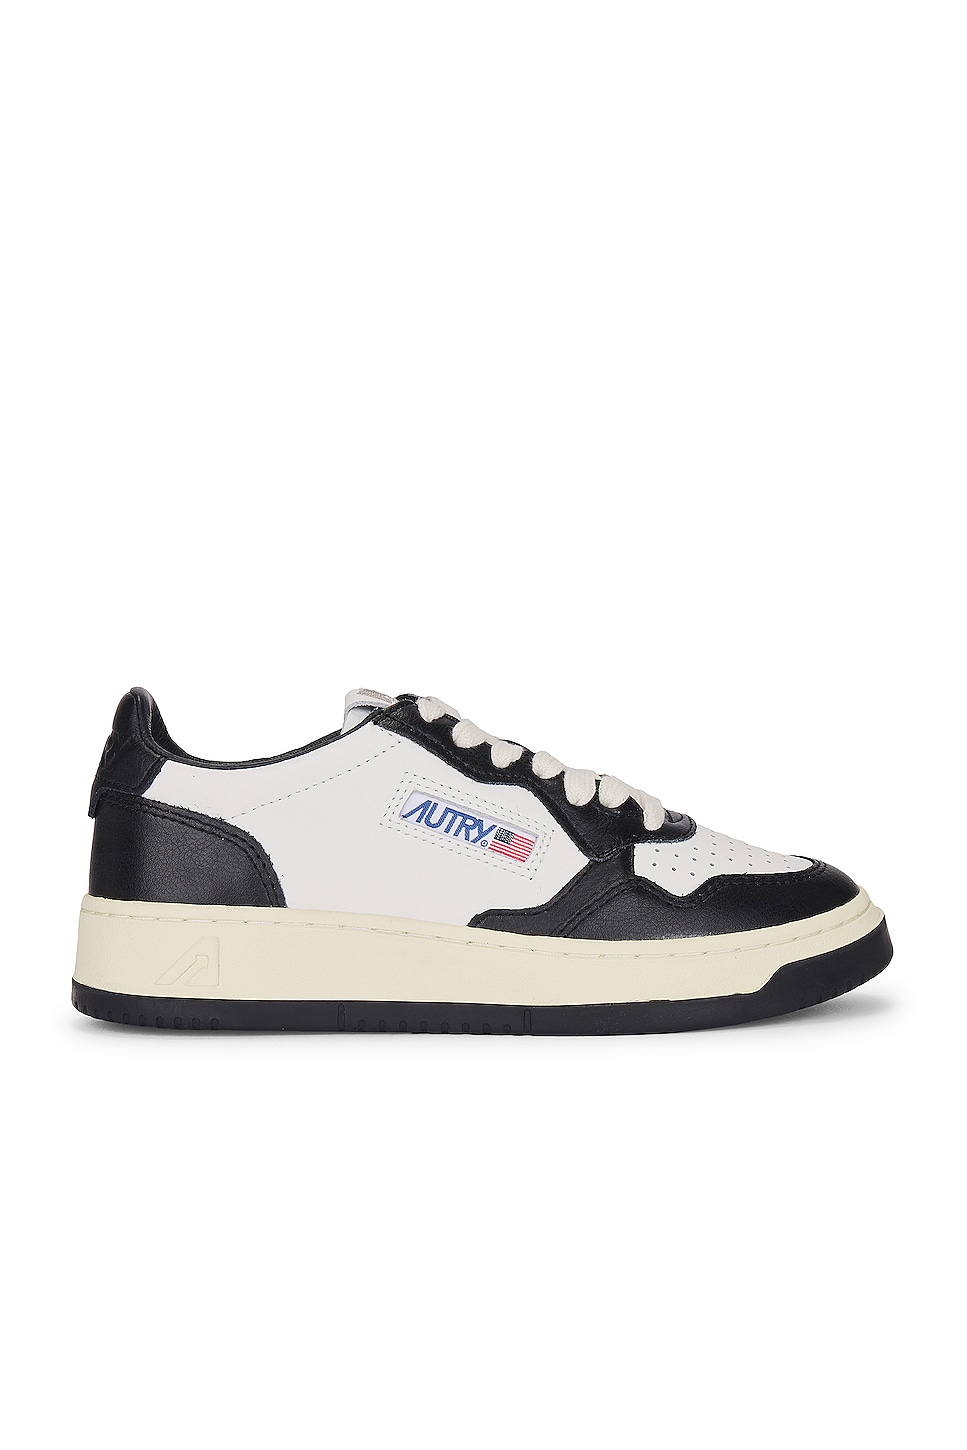 Image 1 of Autry Medalist Low Sneaker in Leather, Leather White, & Leather Black